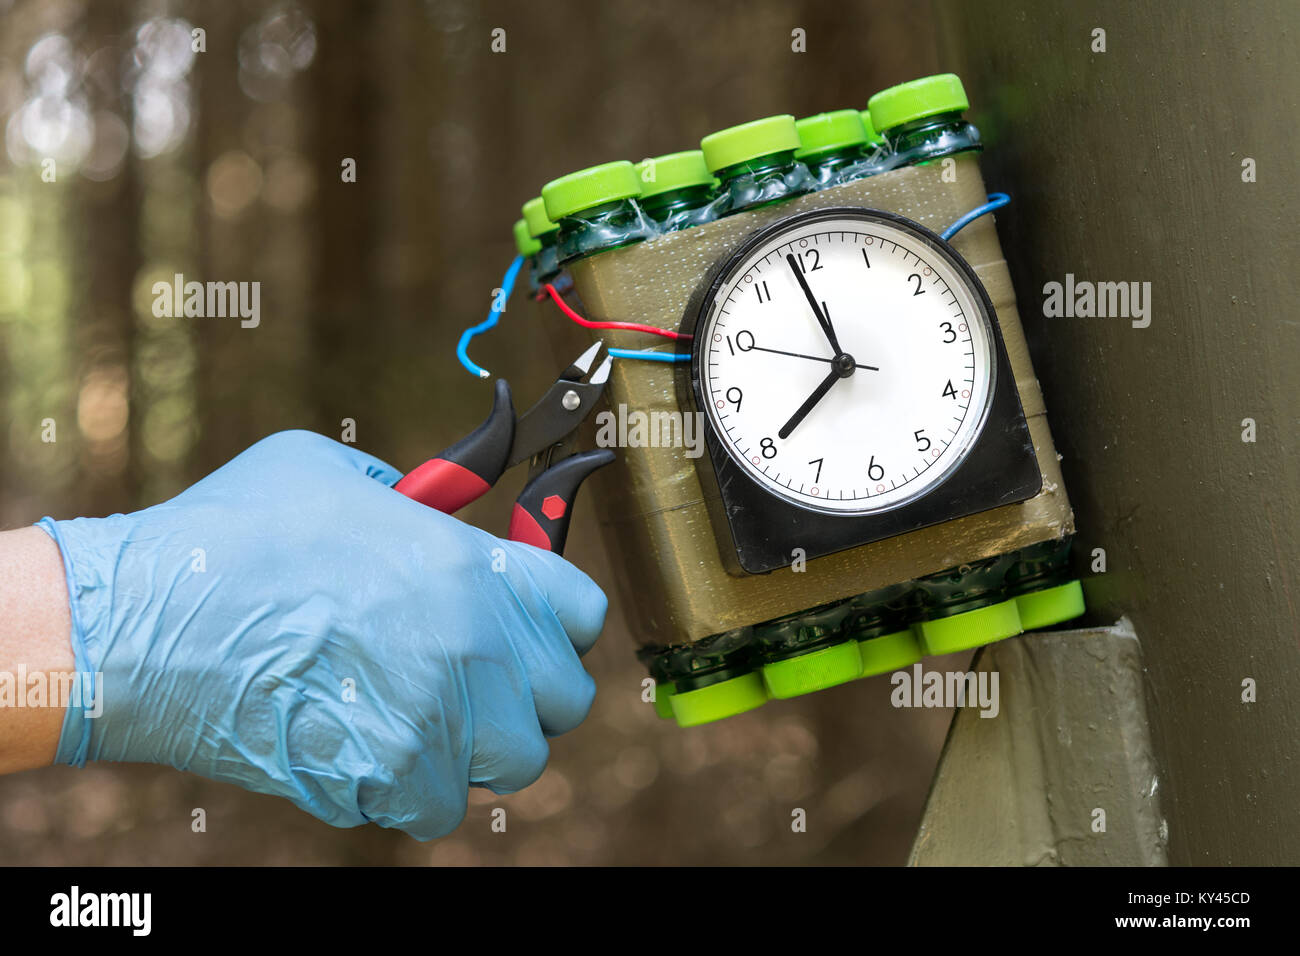 Deactivation of time bomb. Disposal of dangerous timebomb placed at a metal construction. Stock Photo